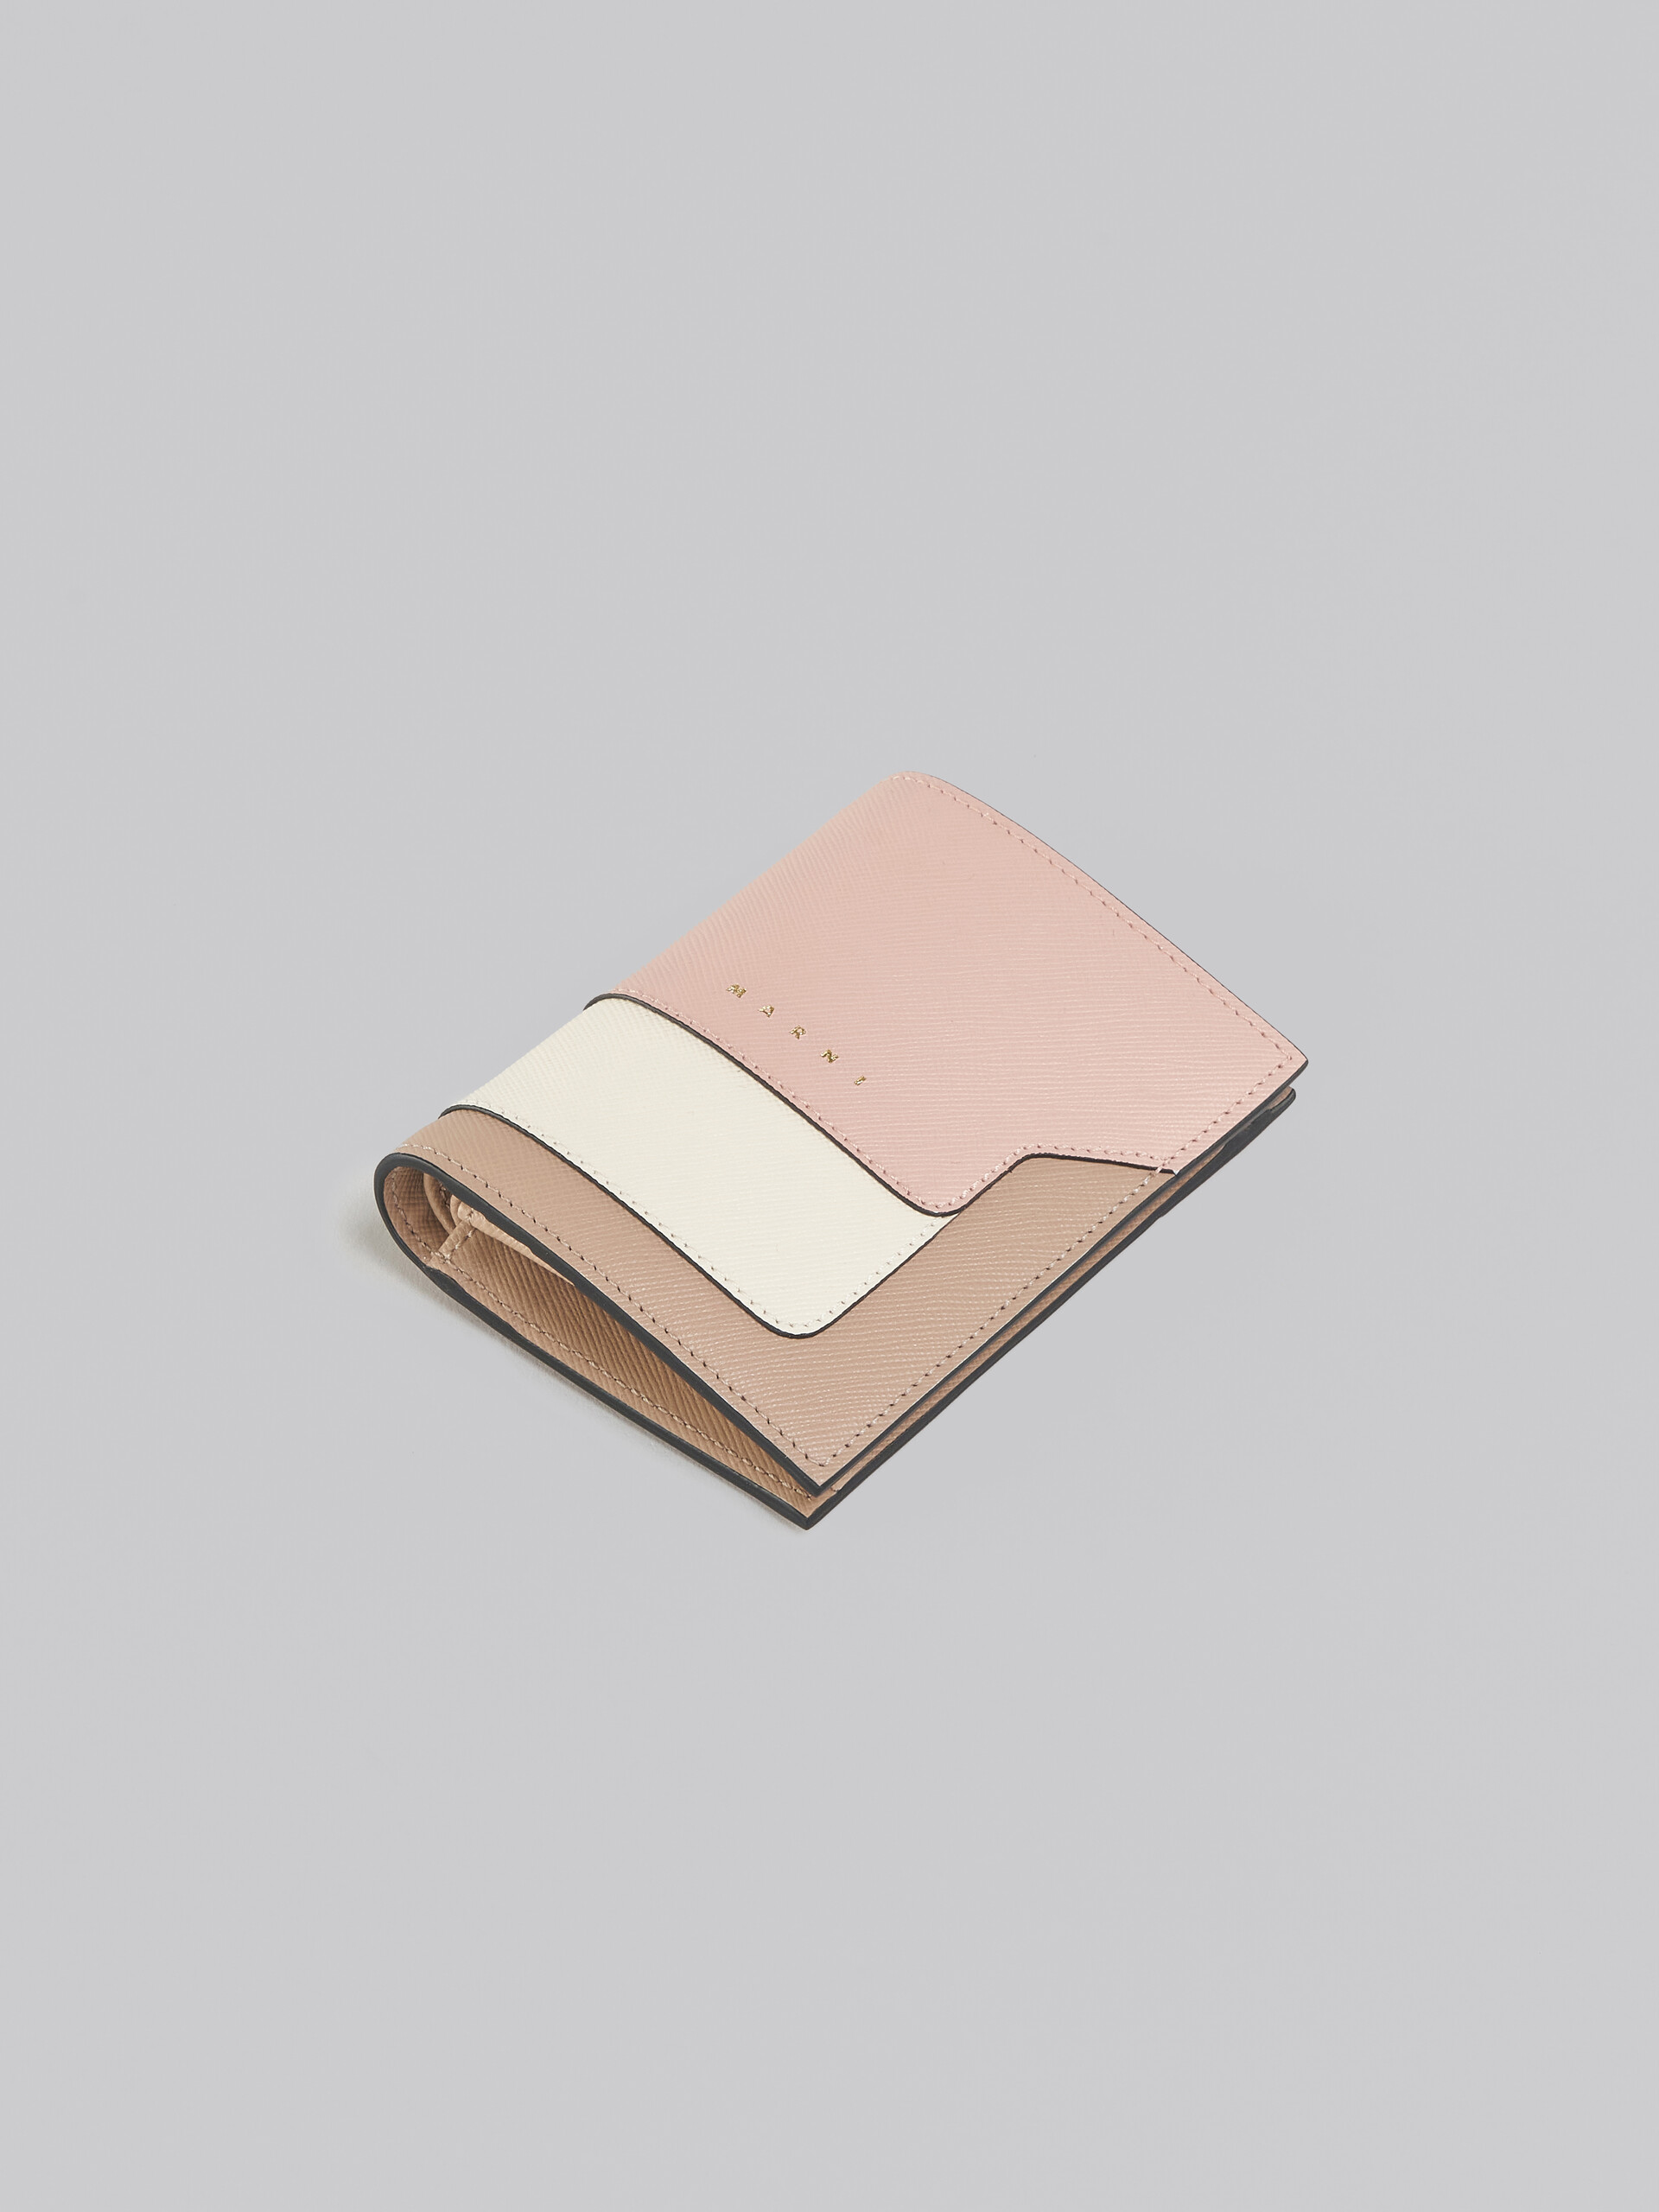 Pink, white and beige saffiano leather bi-fold wallet - Wallets - Image 5